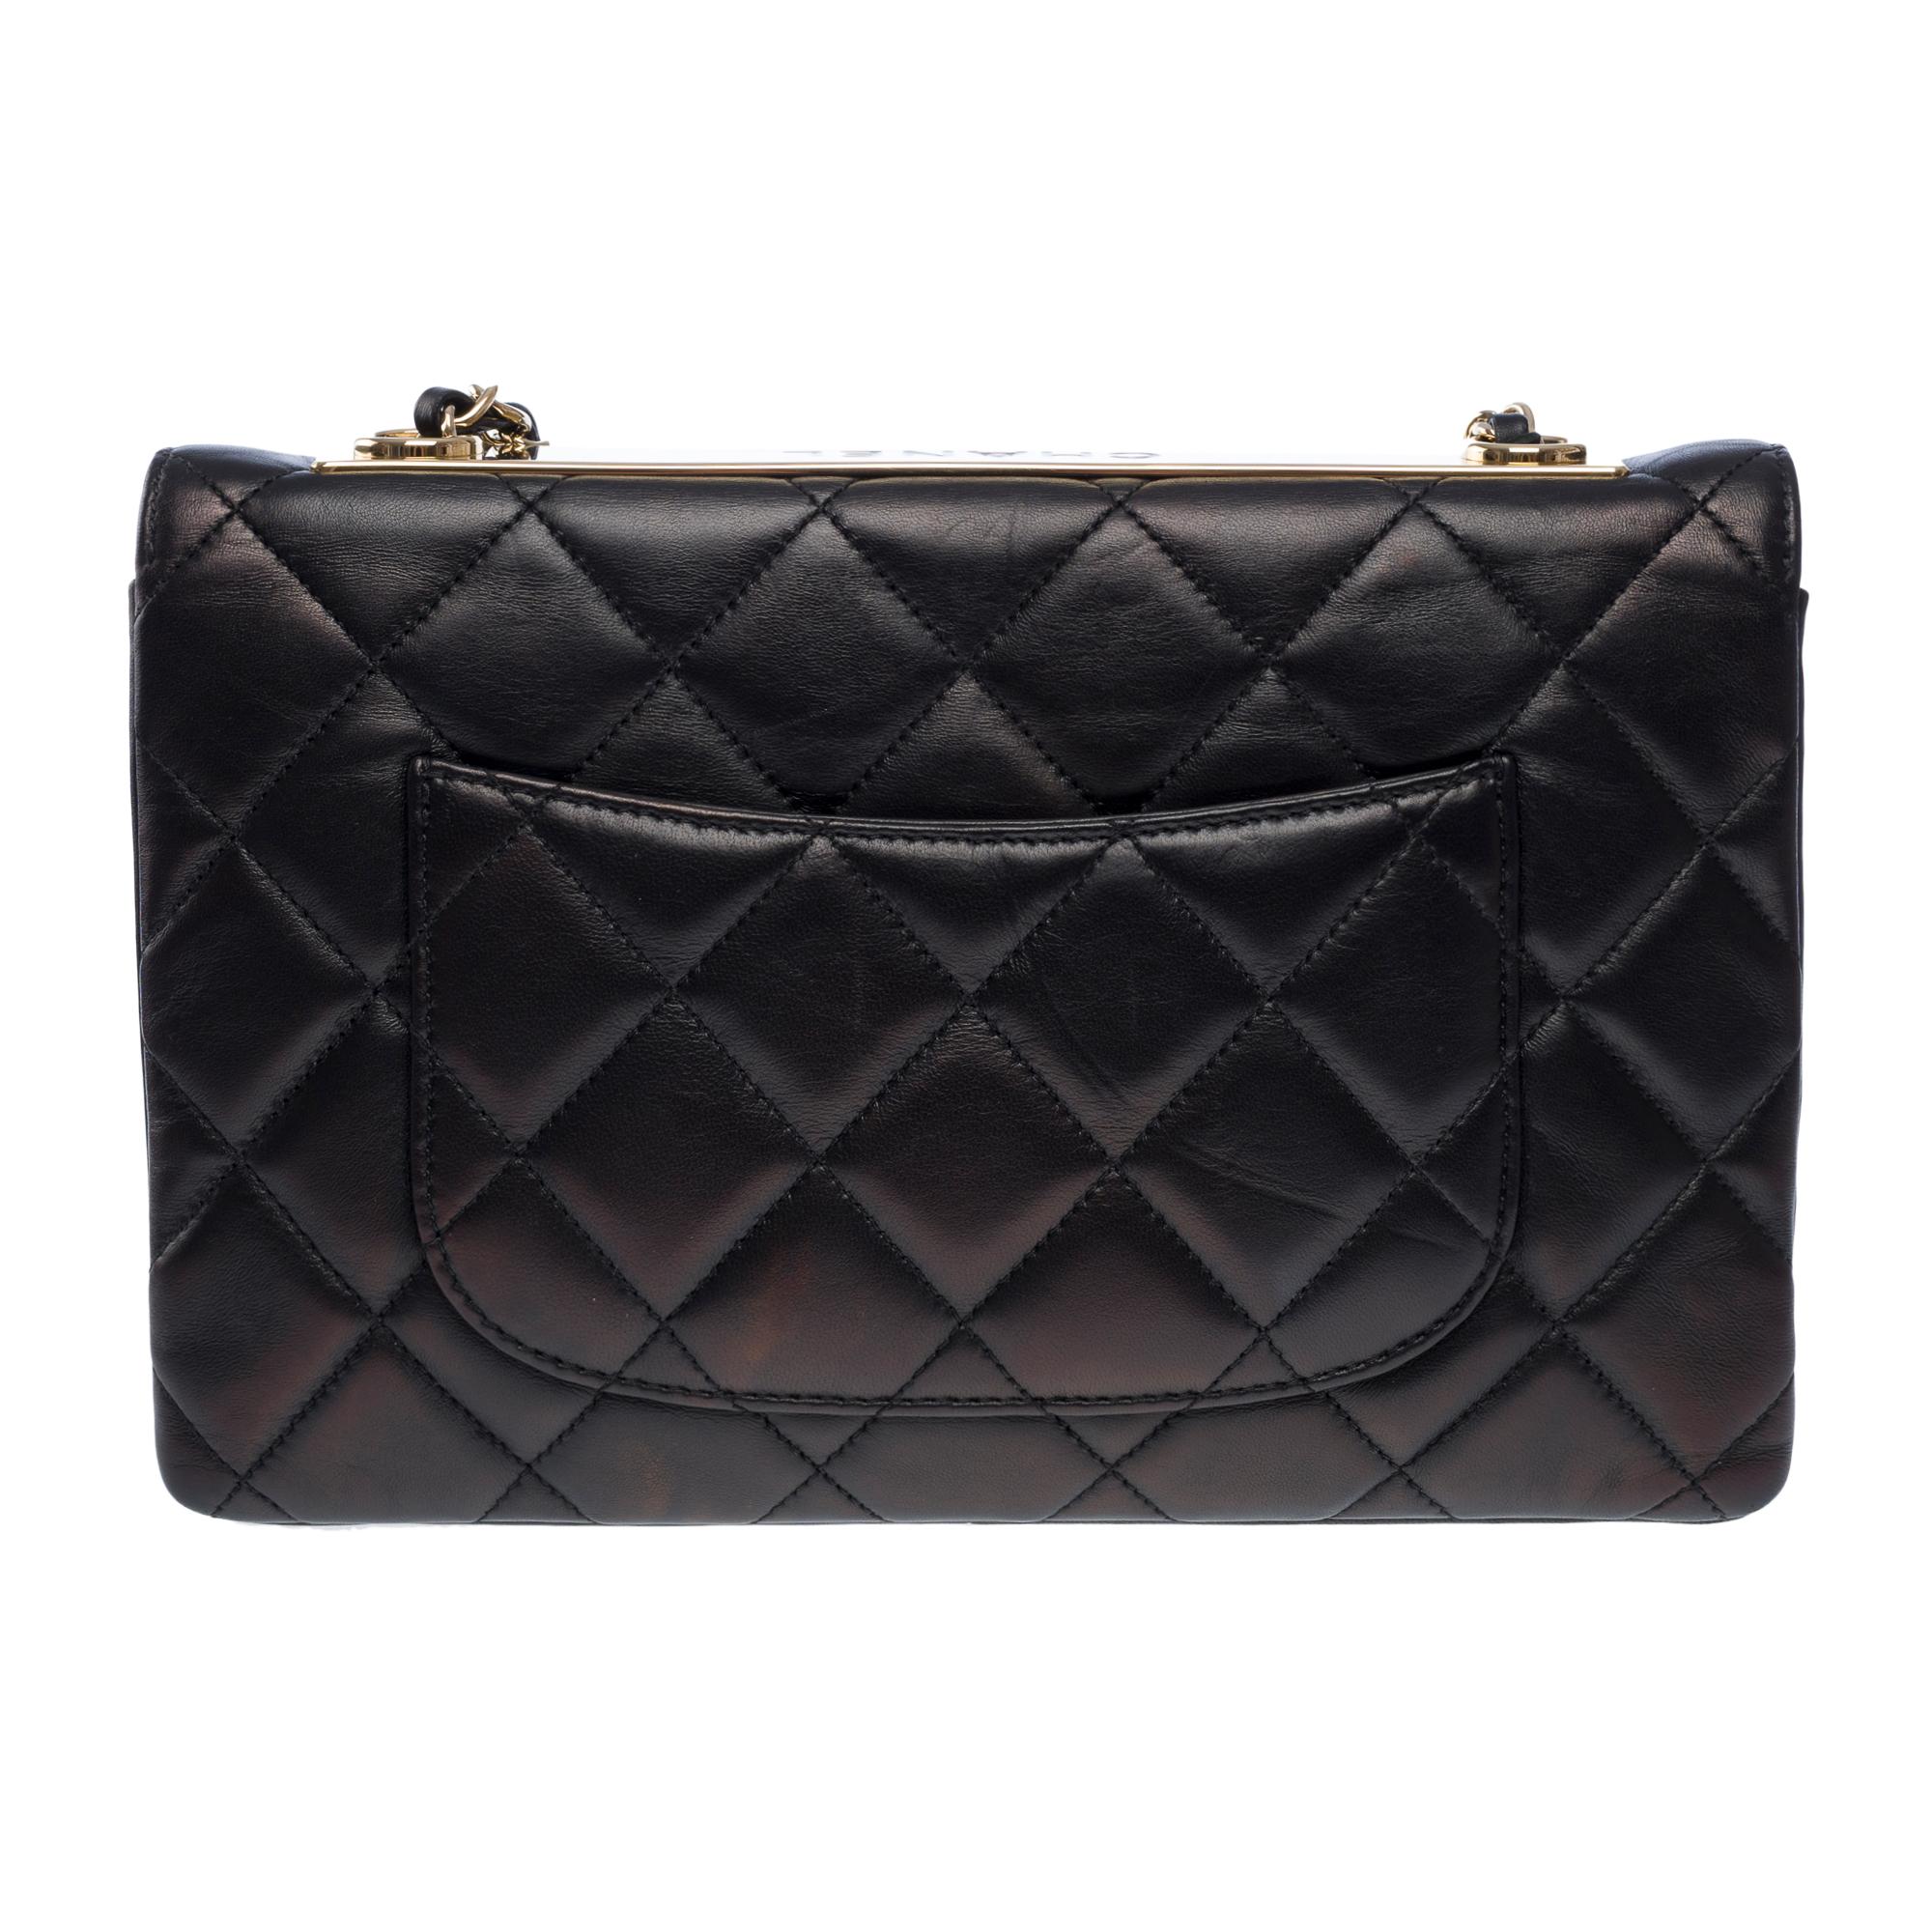 Women's Rare Chanel Timeless/Classic Coco Trendy CC shoulder bag in black leather, GHW  For Sale